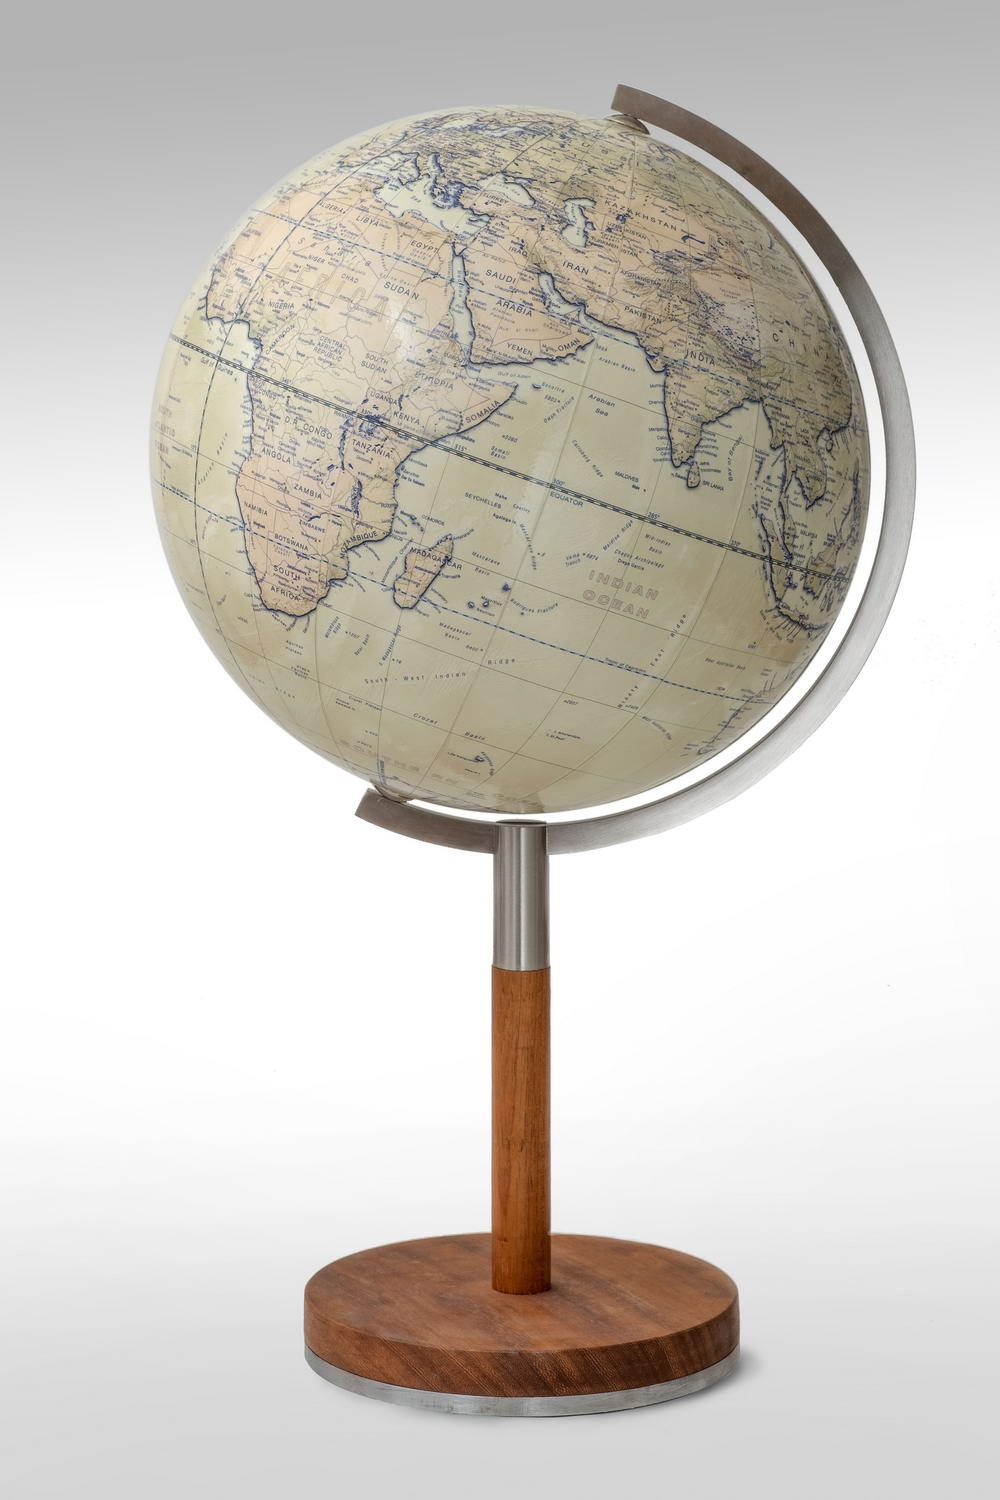 Contemporary stylish globe with brushed steel arm. Showing Indian Ocean on the globe.